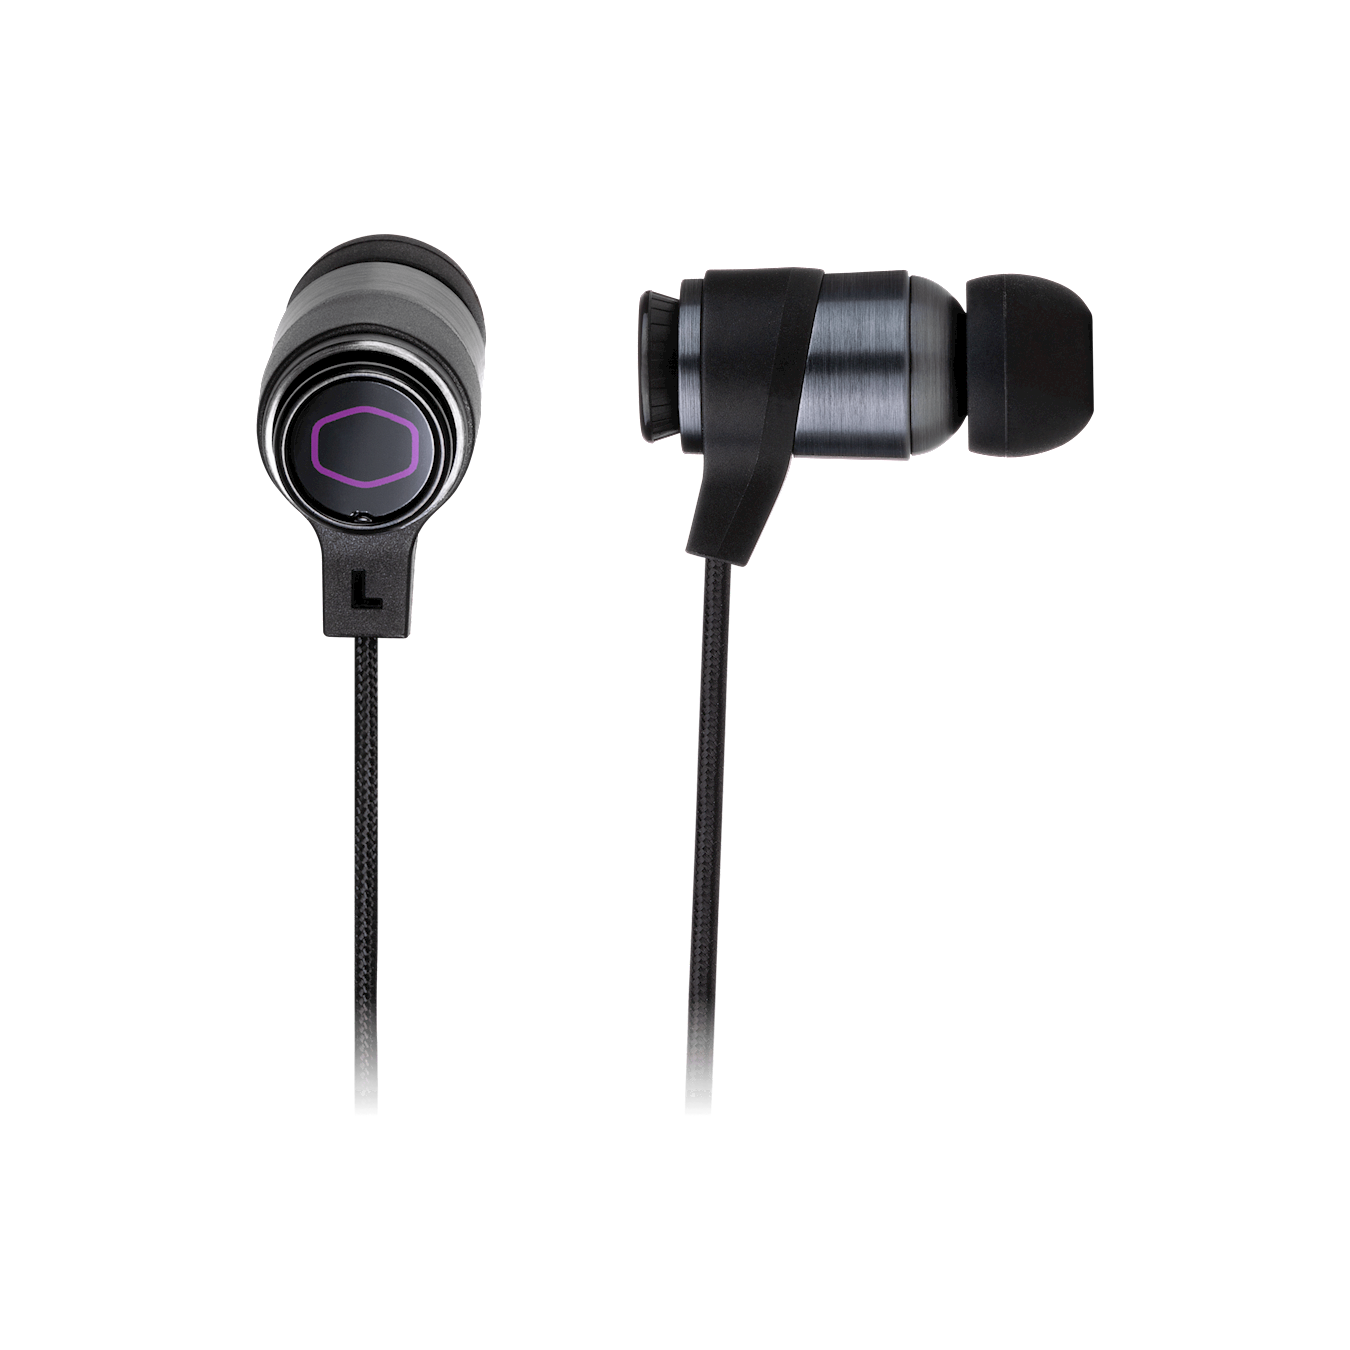 MH710 - a pair of earbuds that deliver an excellent gaming experience